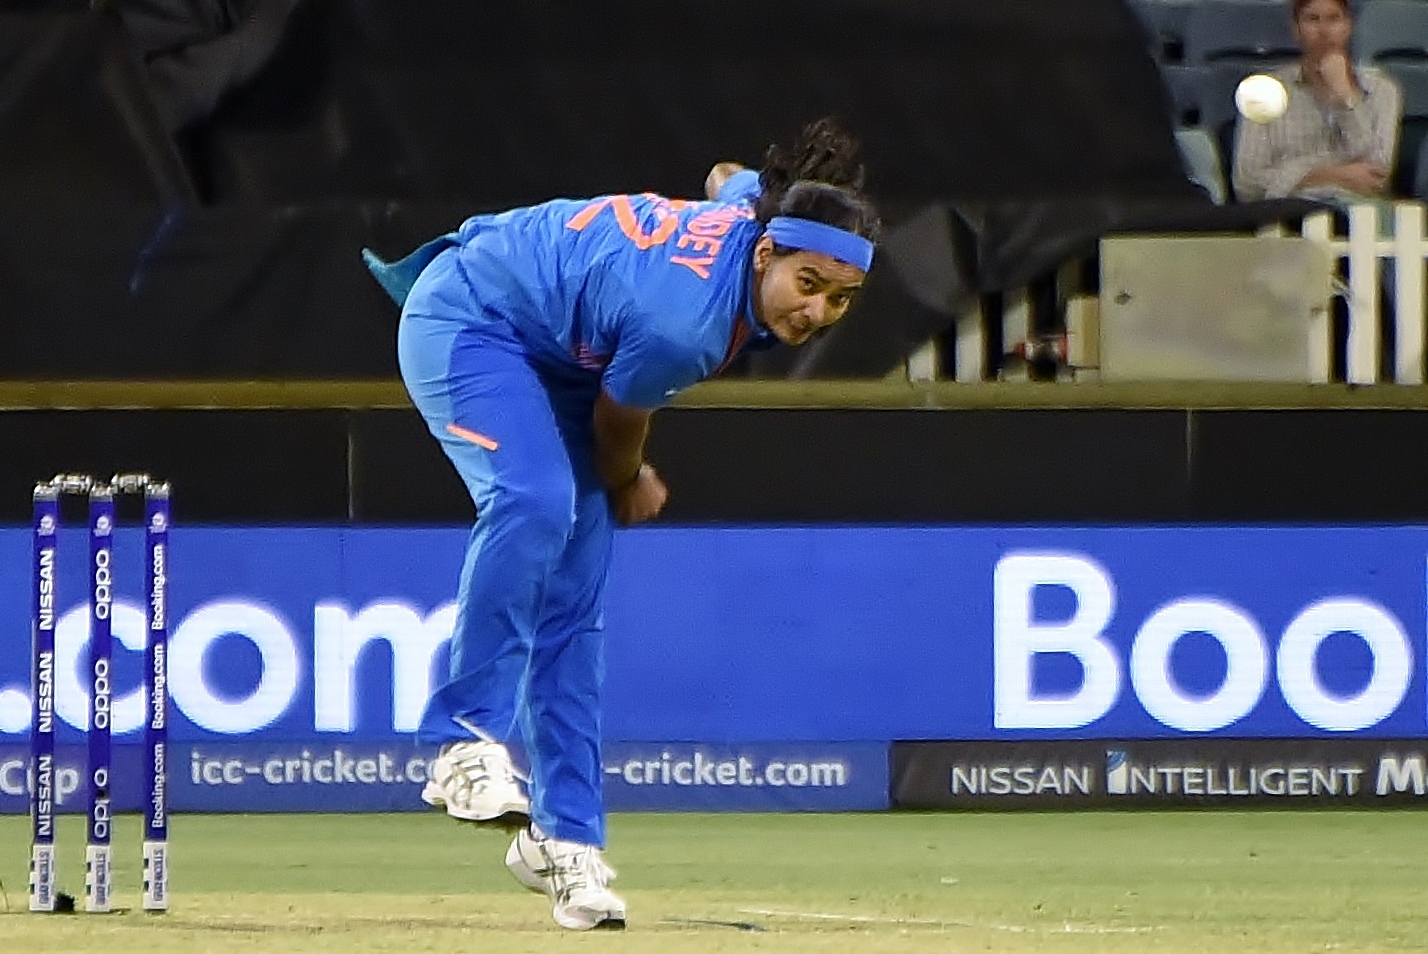 India Vs South Africa Women 2021 Series Preview: Cricket Finally Makes A Comeback to Women’s Cricket